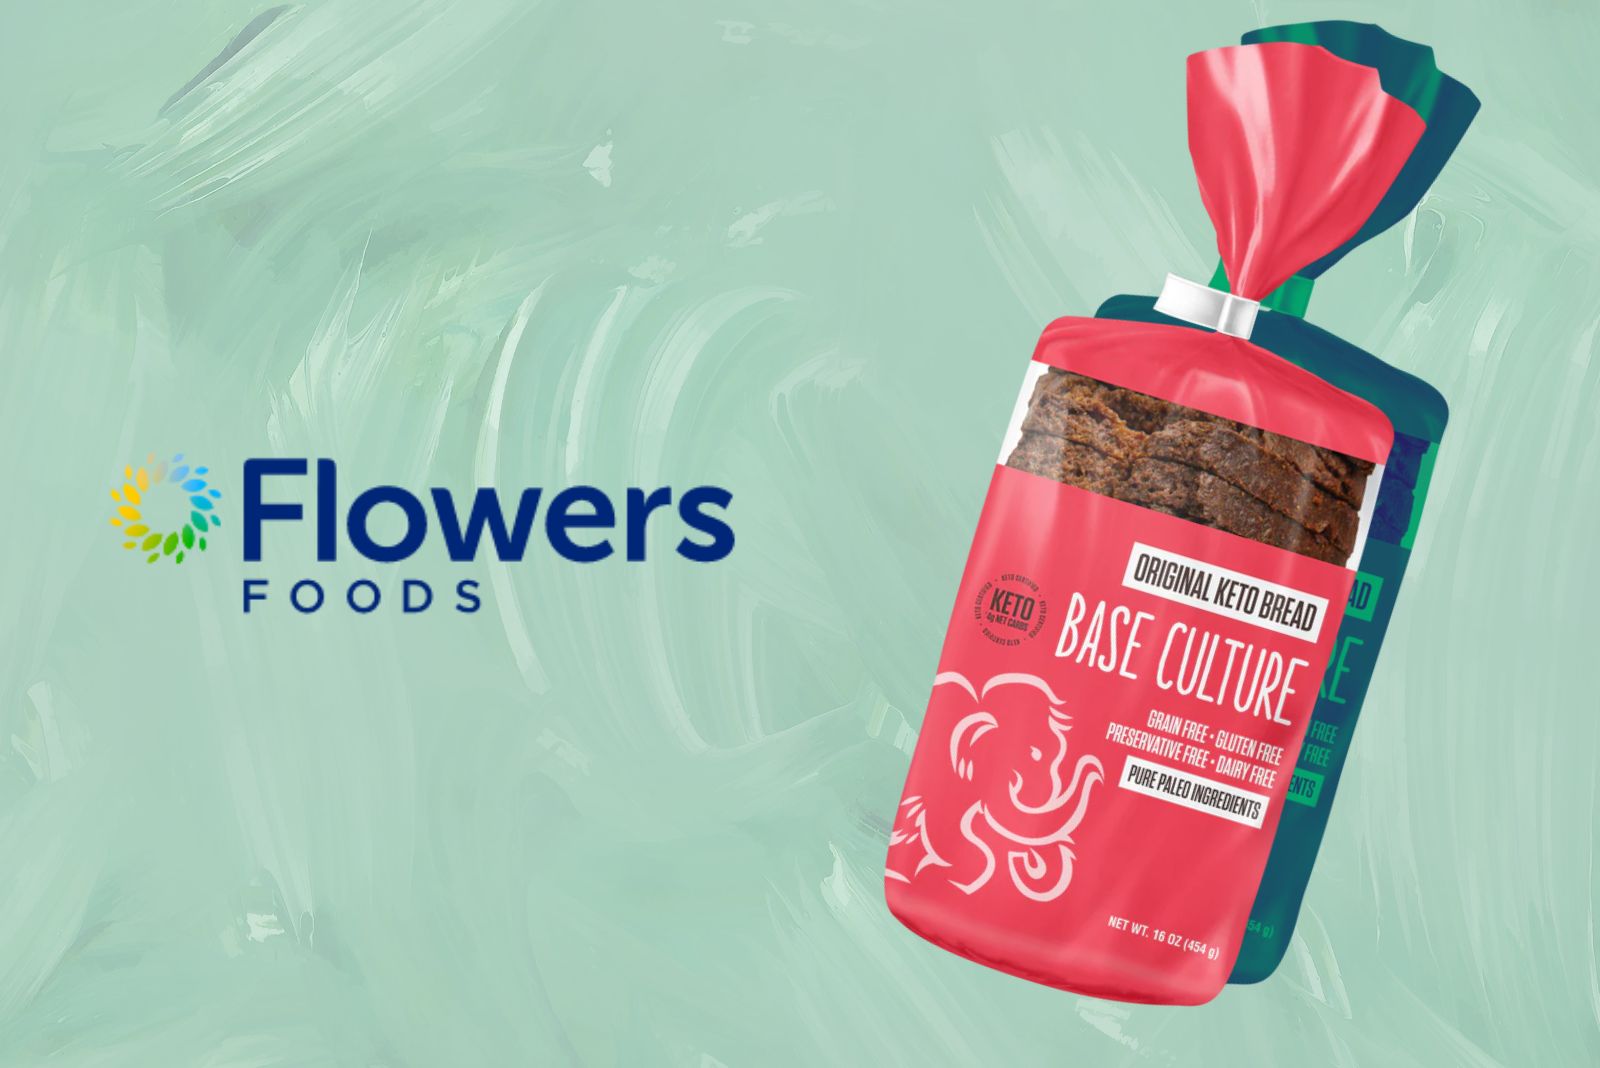 Flowers Foods invests in better-for-you brand Base Culture